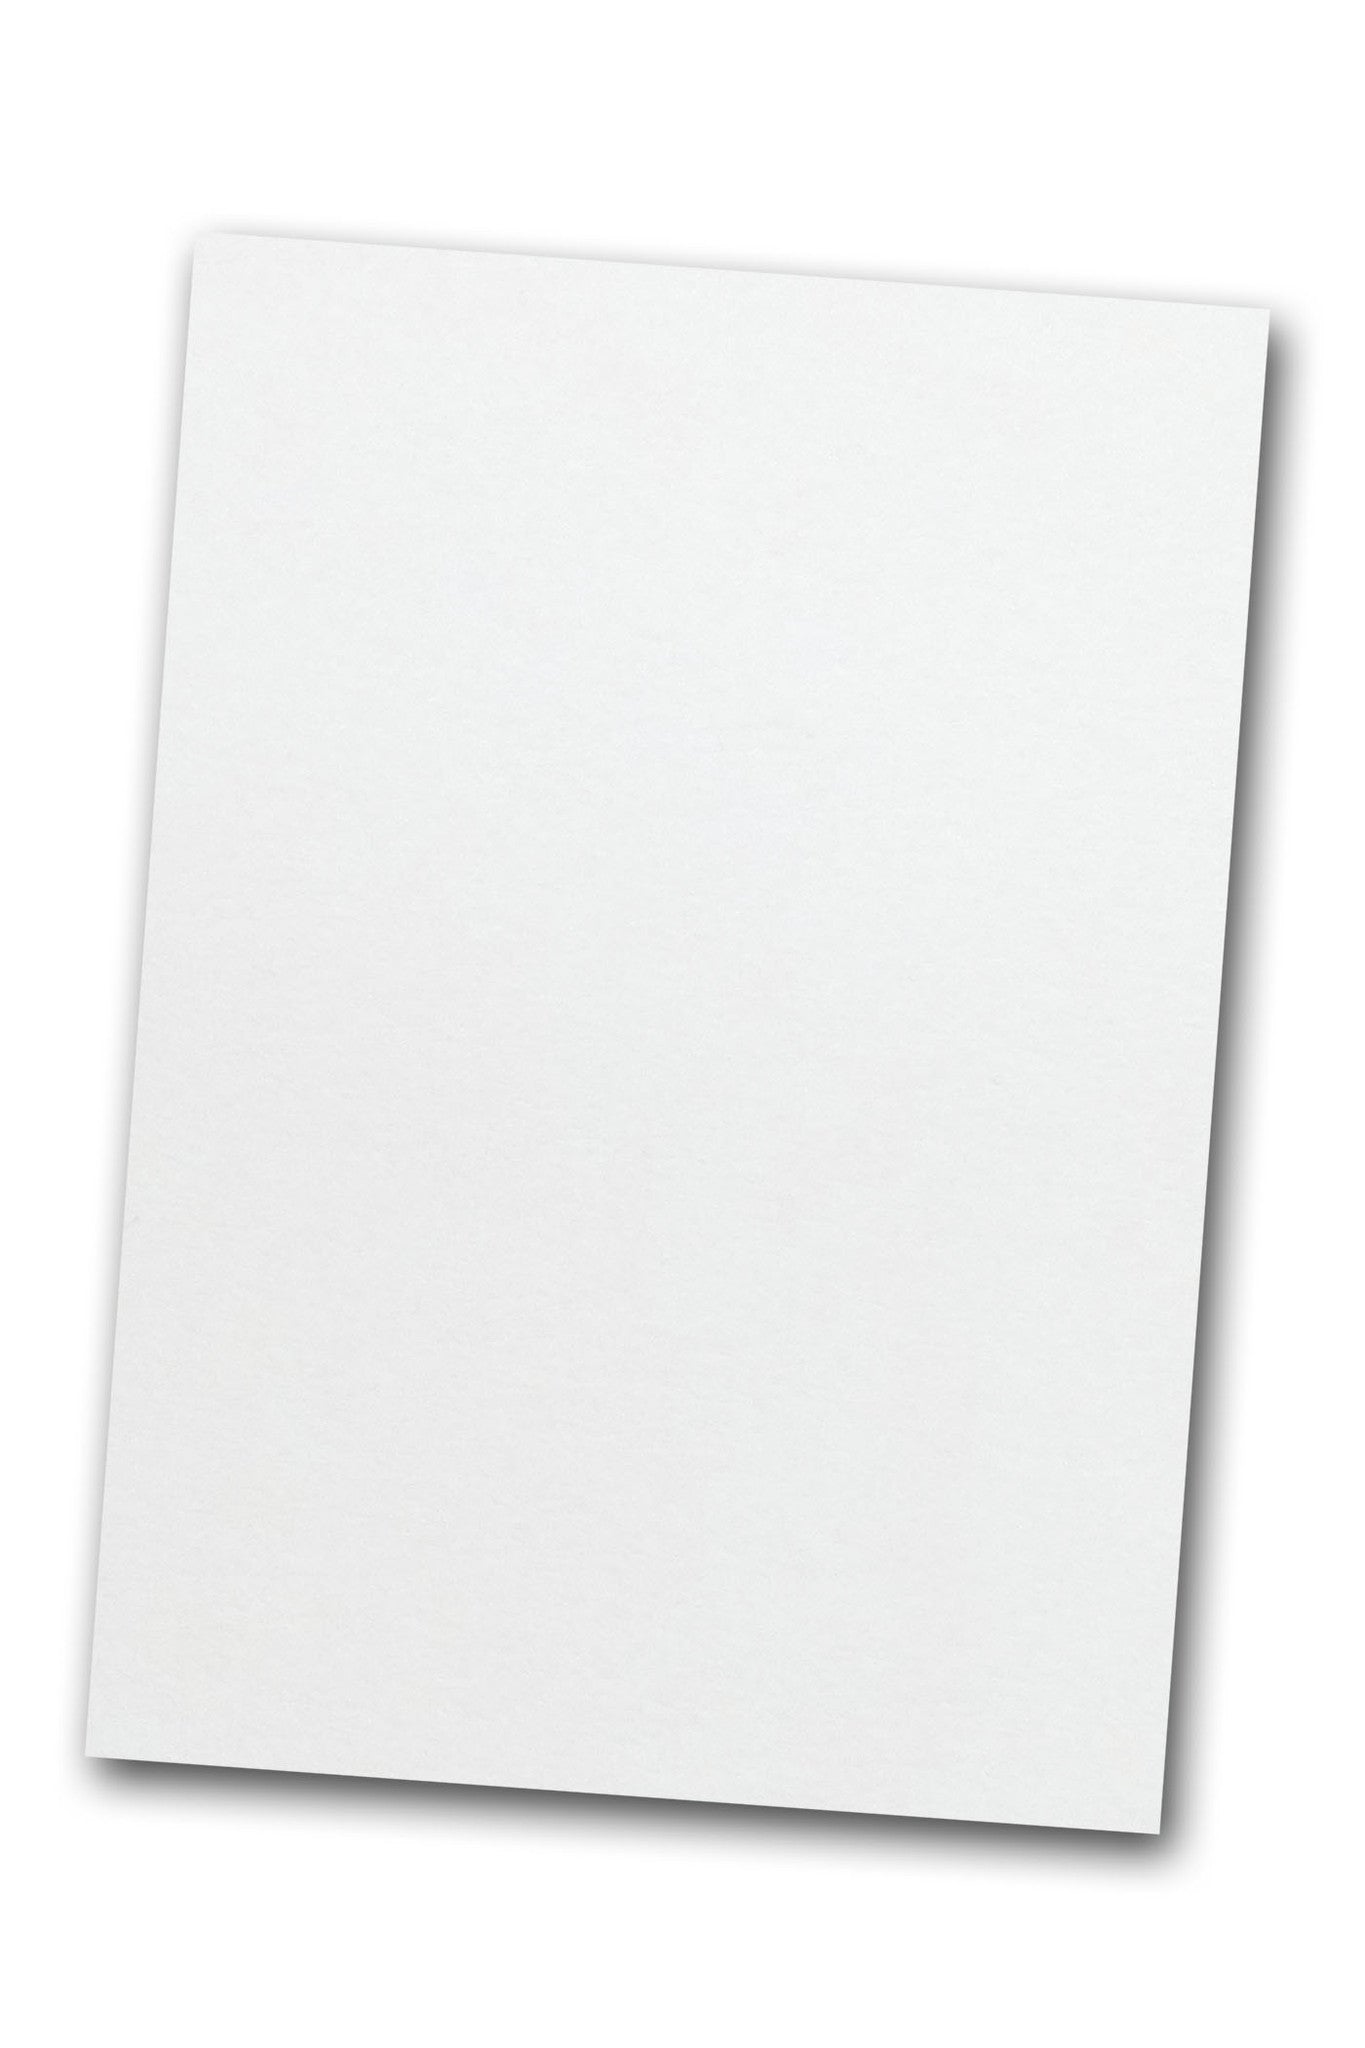 PAPER CUT THE PAPER CUT 10 GREETING (A-2) SOLAR WHITE NEENAH CLASSIC CREST  110lb CARDS WITH ENVELOPES